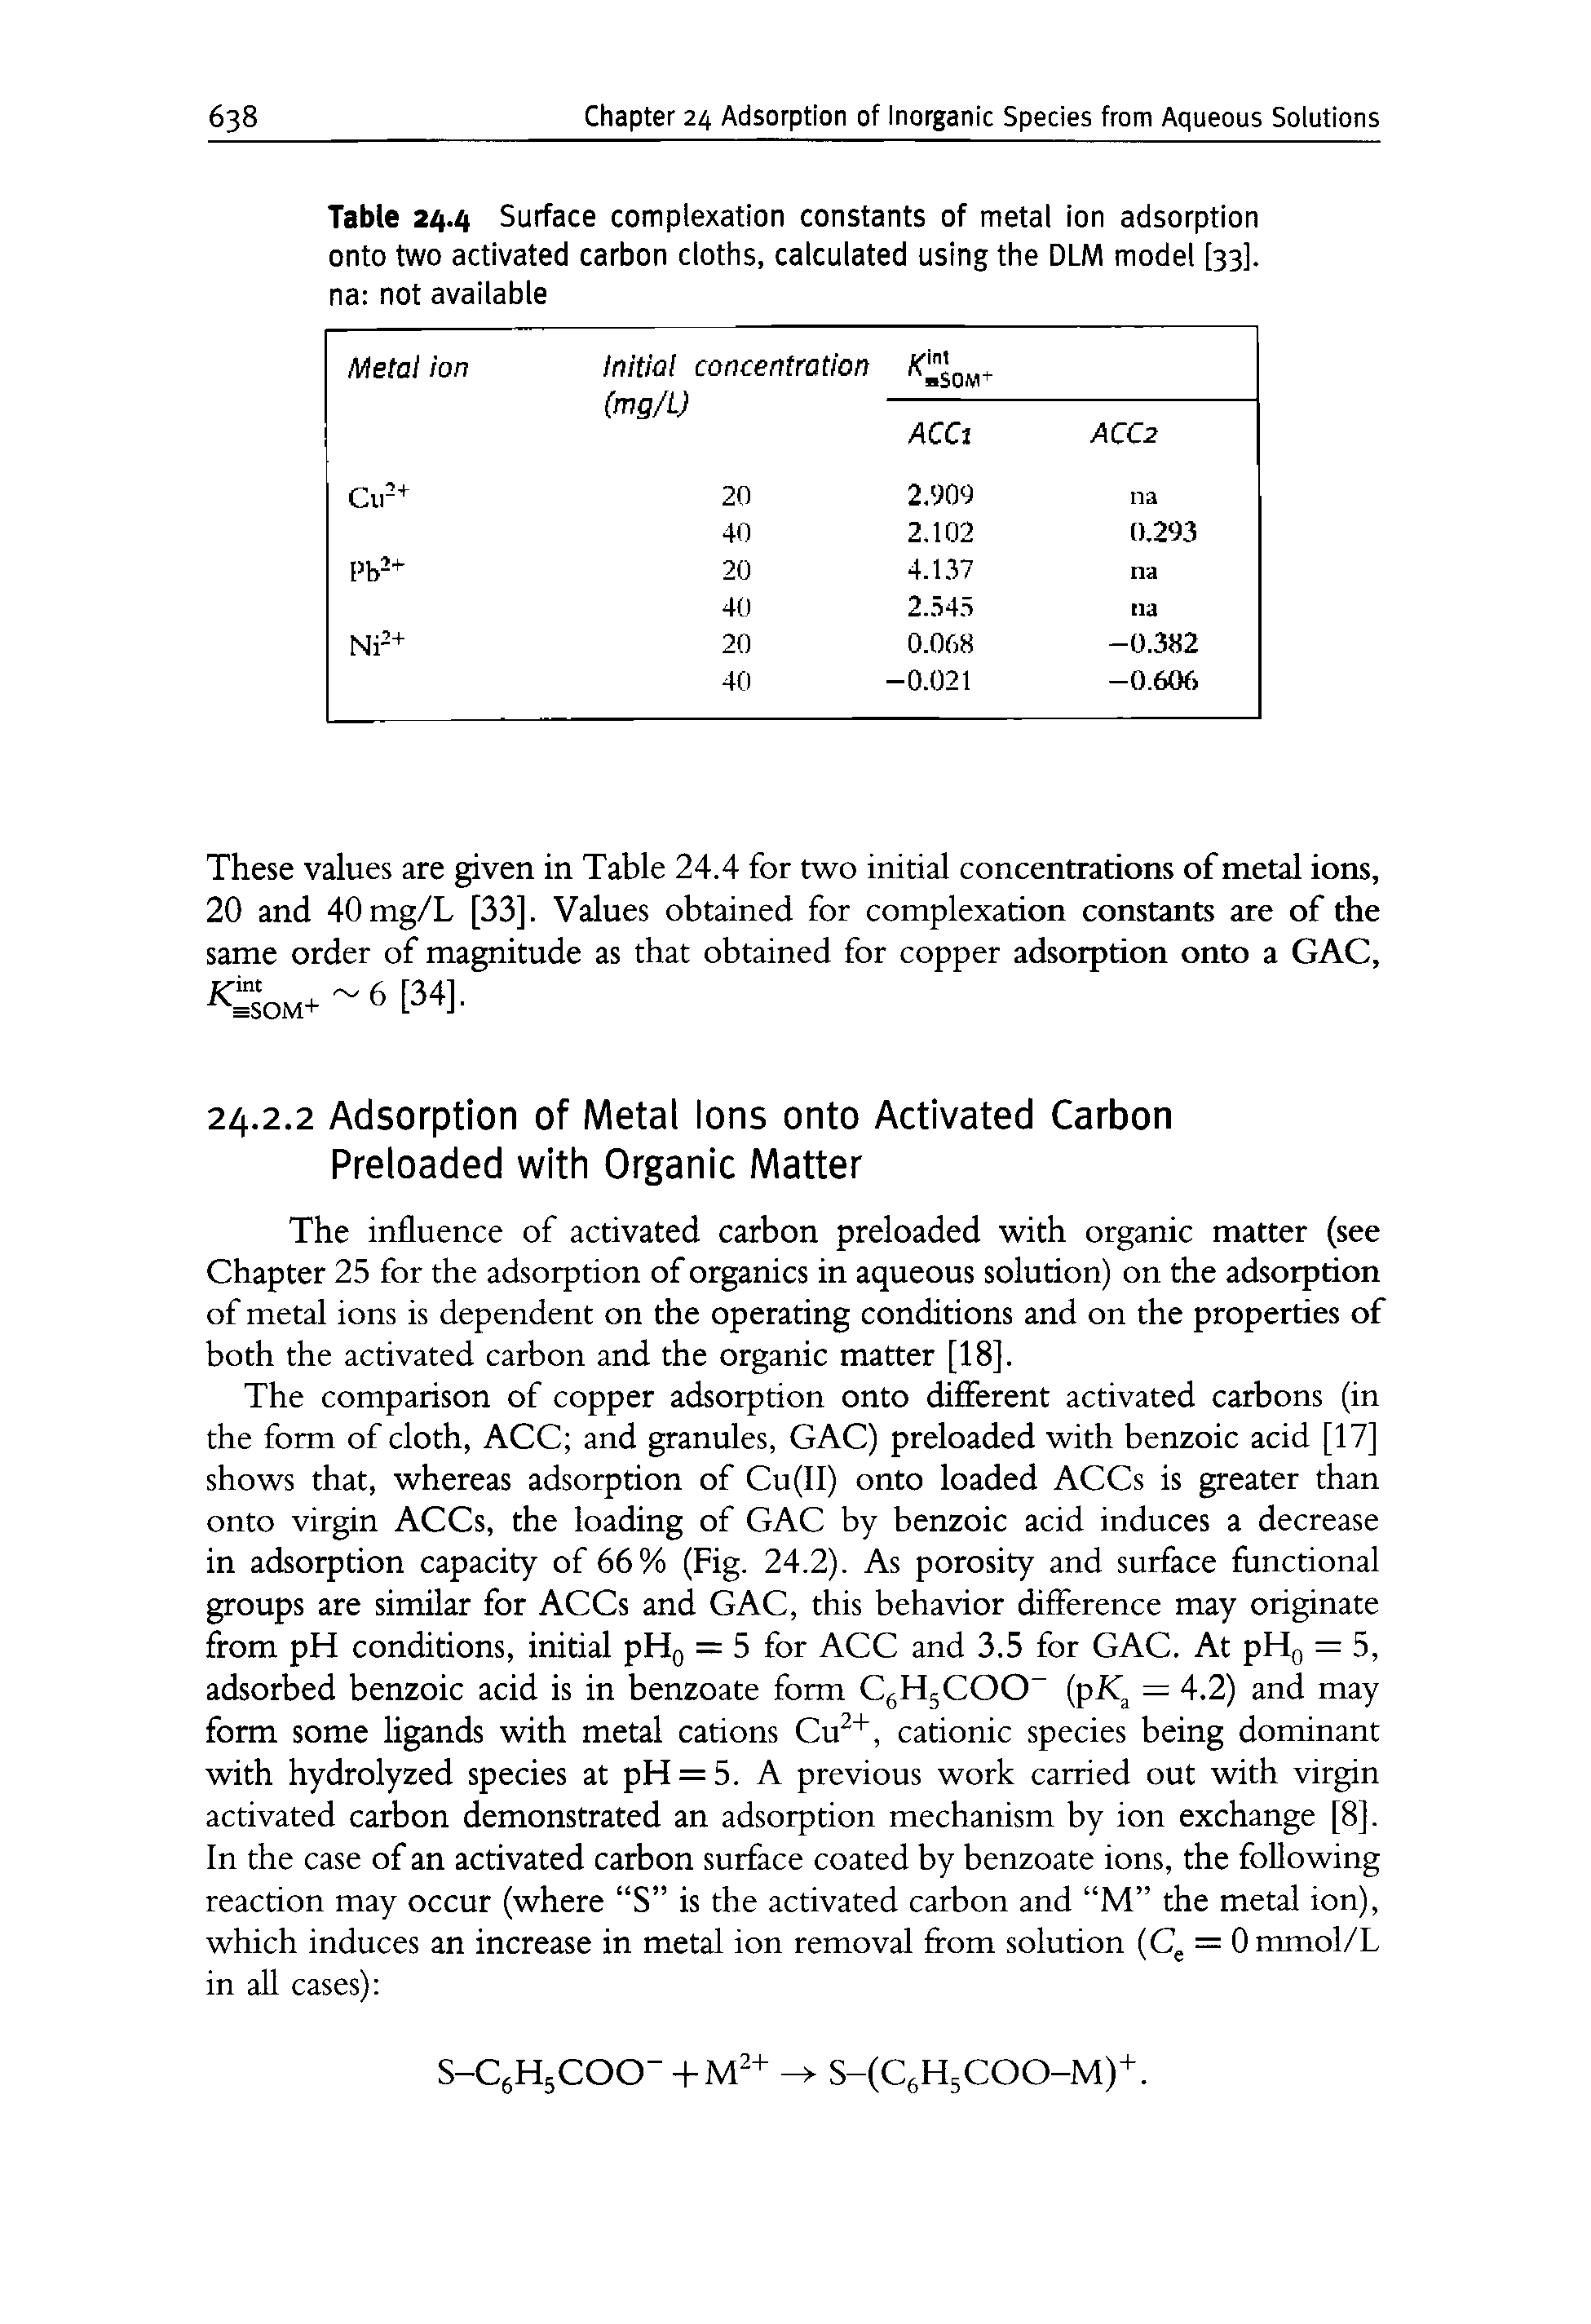 Table 24.4 Surface complexation constants of metal ion adsorption onto two activated carbon cloths, calculated using the DLM model [33]. na not available...